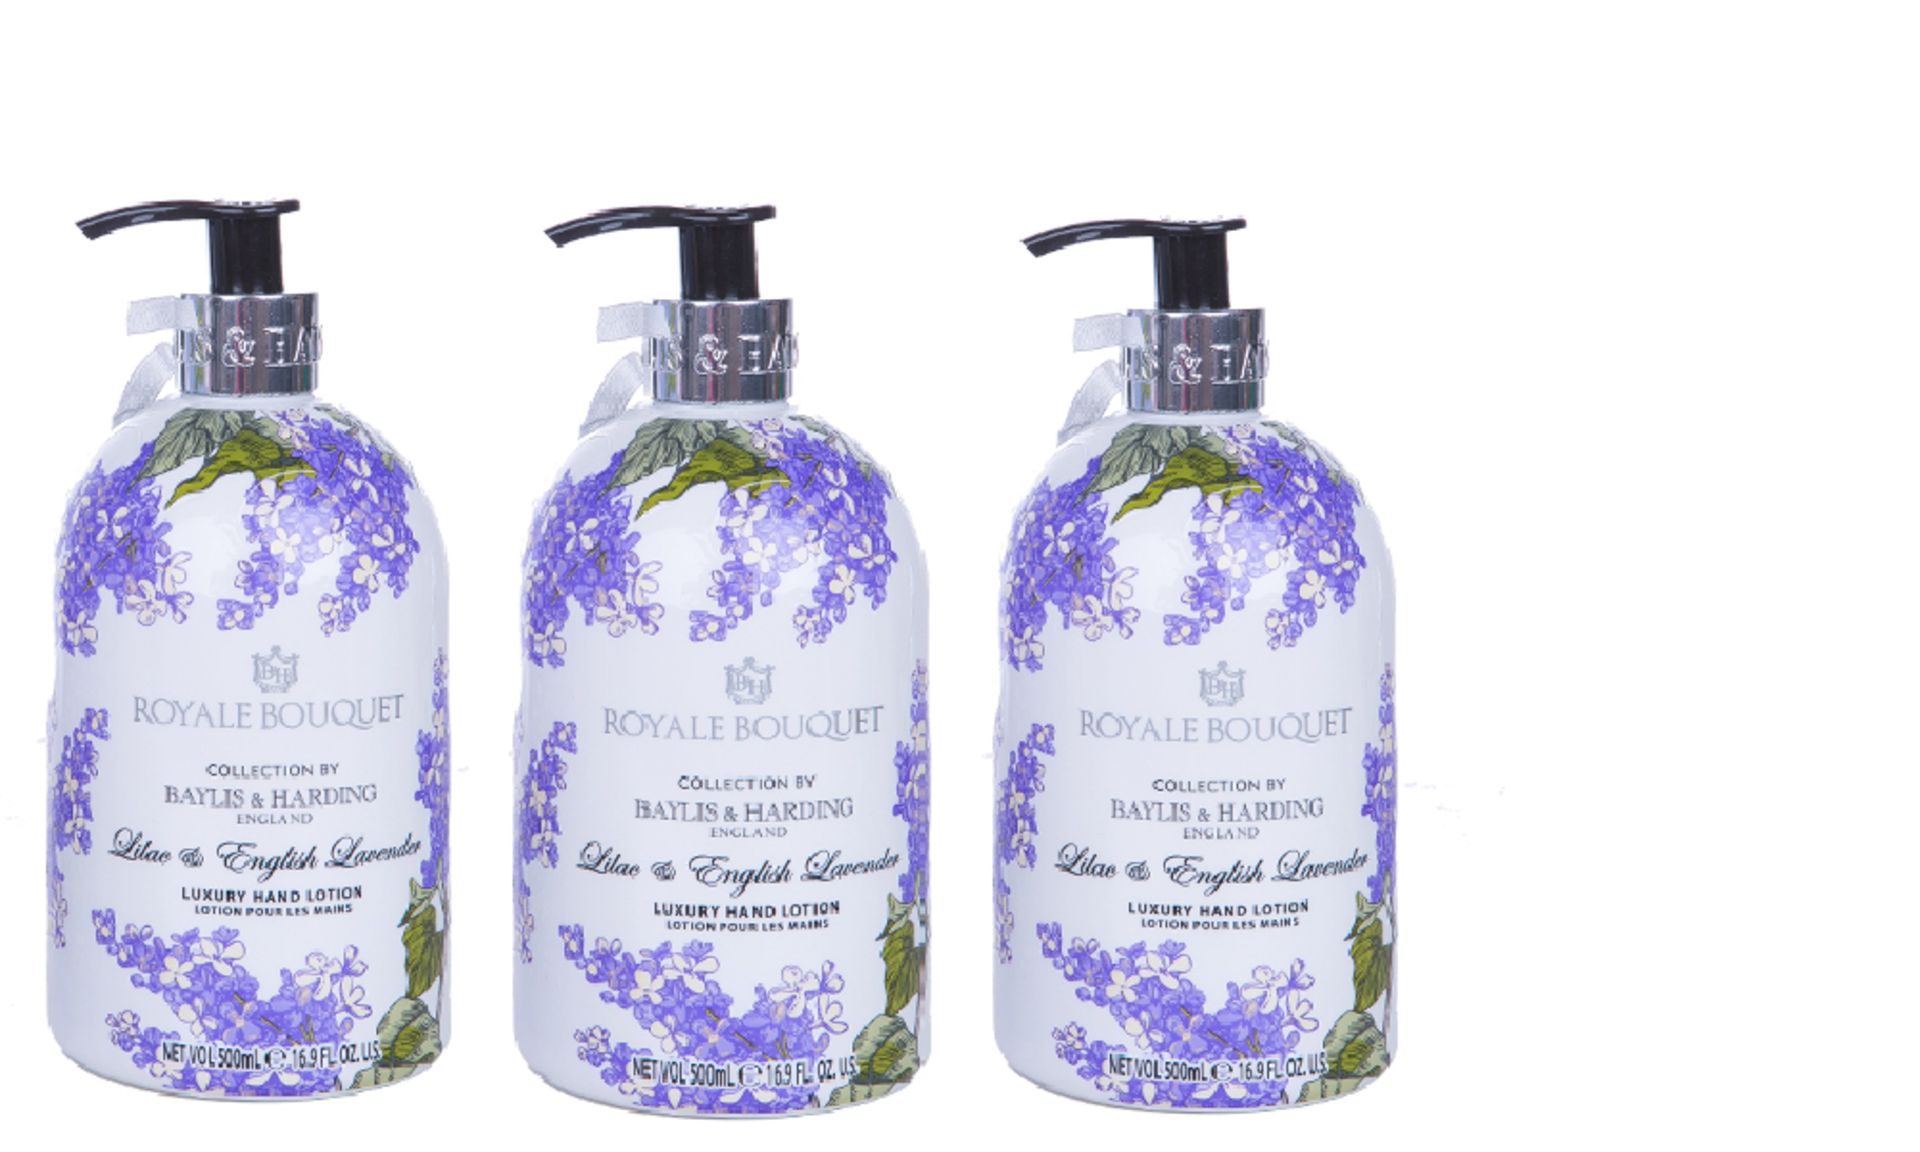 V *TRADE QTY* Brand New 3 x 500ml Baylis and Harding Lilac and Lavener Hand Wash Total ISP £9.00 X 3